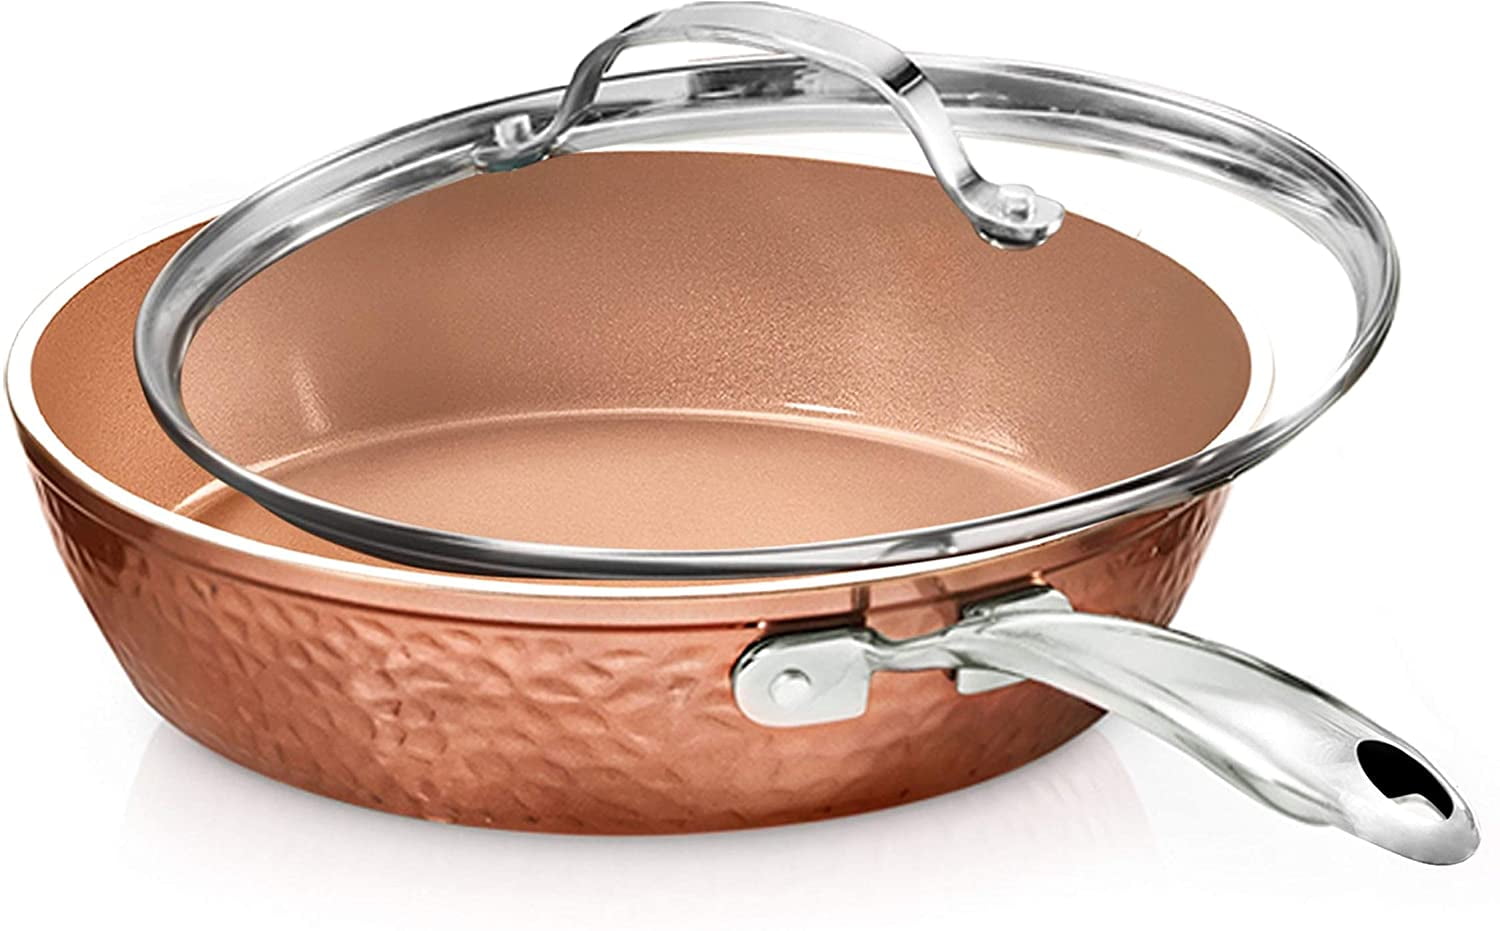 Deep Ceramic Copper Nonstick Square Chef Pan 10INCH Kitchen Dining Cookware 